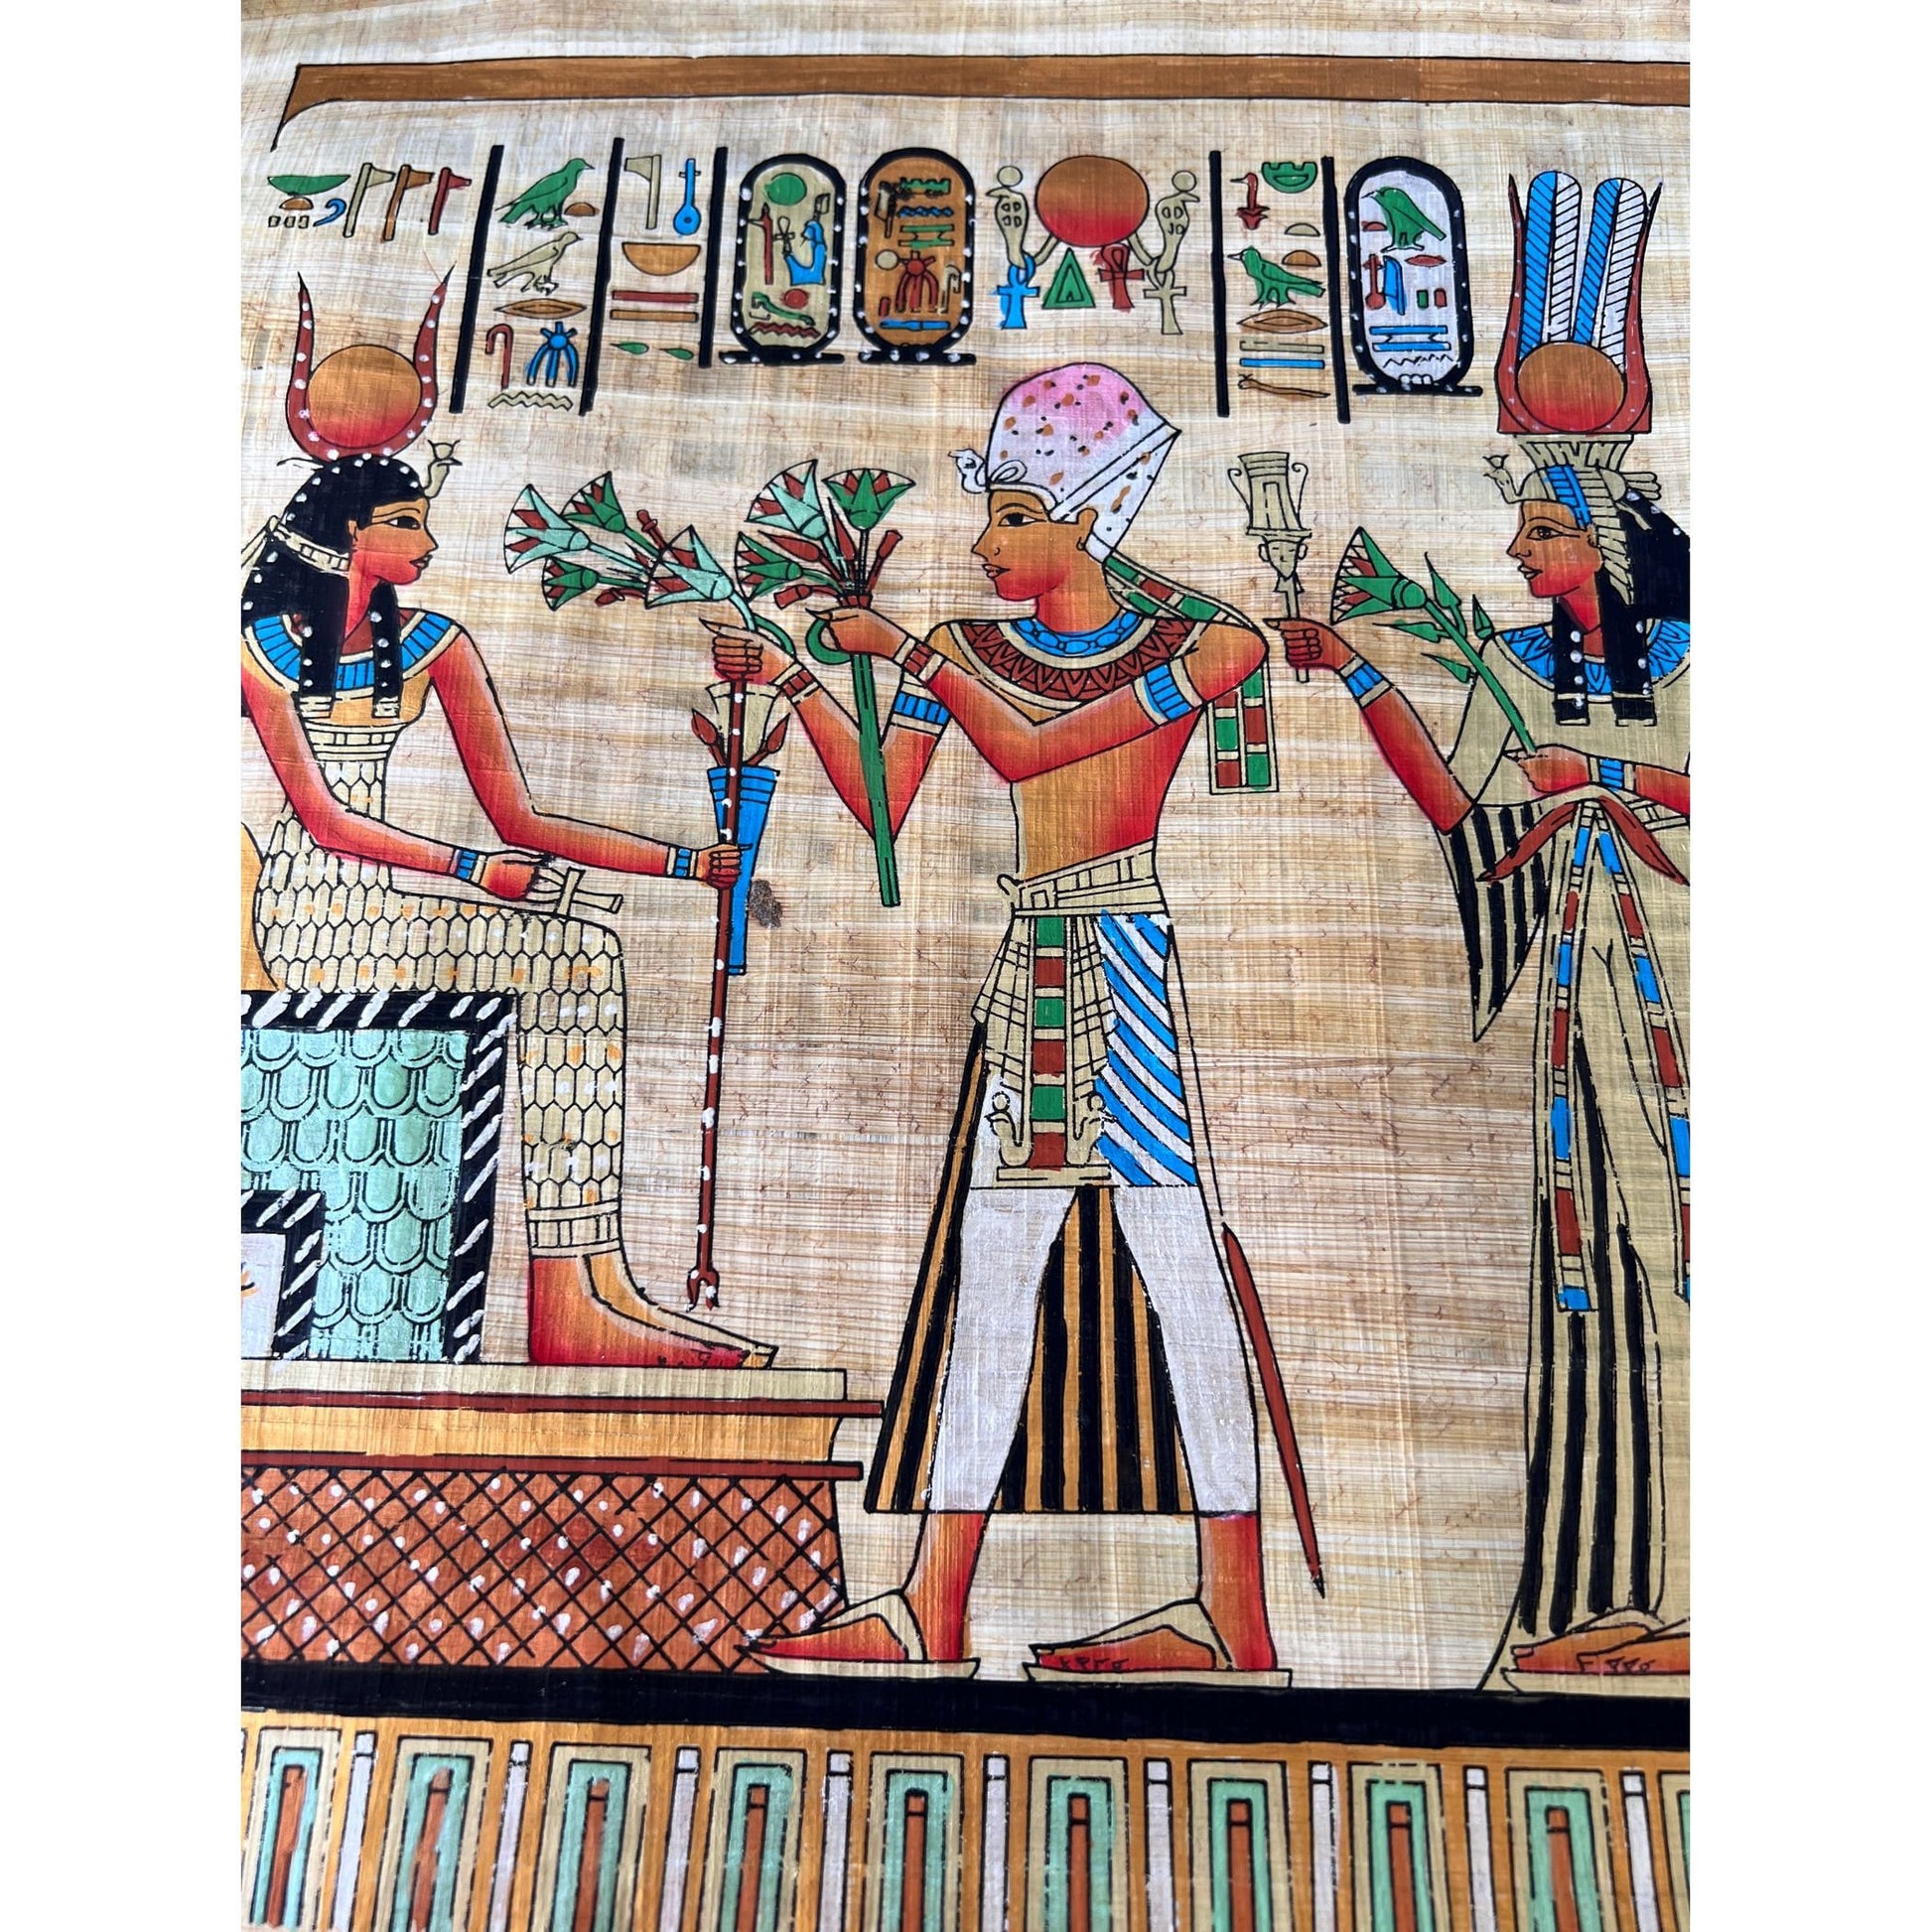 Extra Large Wall Art Rectangle Papyrus Painting, Ramses II, Ramses the Great Scenes on Egyptian Papyrus Paintings, 36x16 Inches 93x43 cm